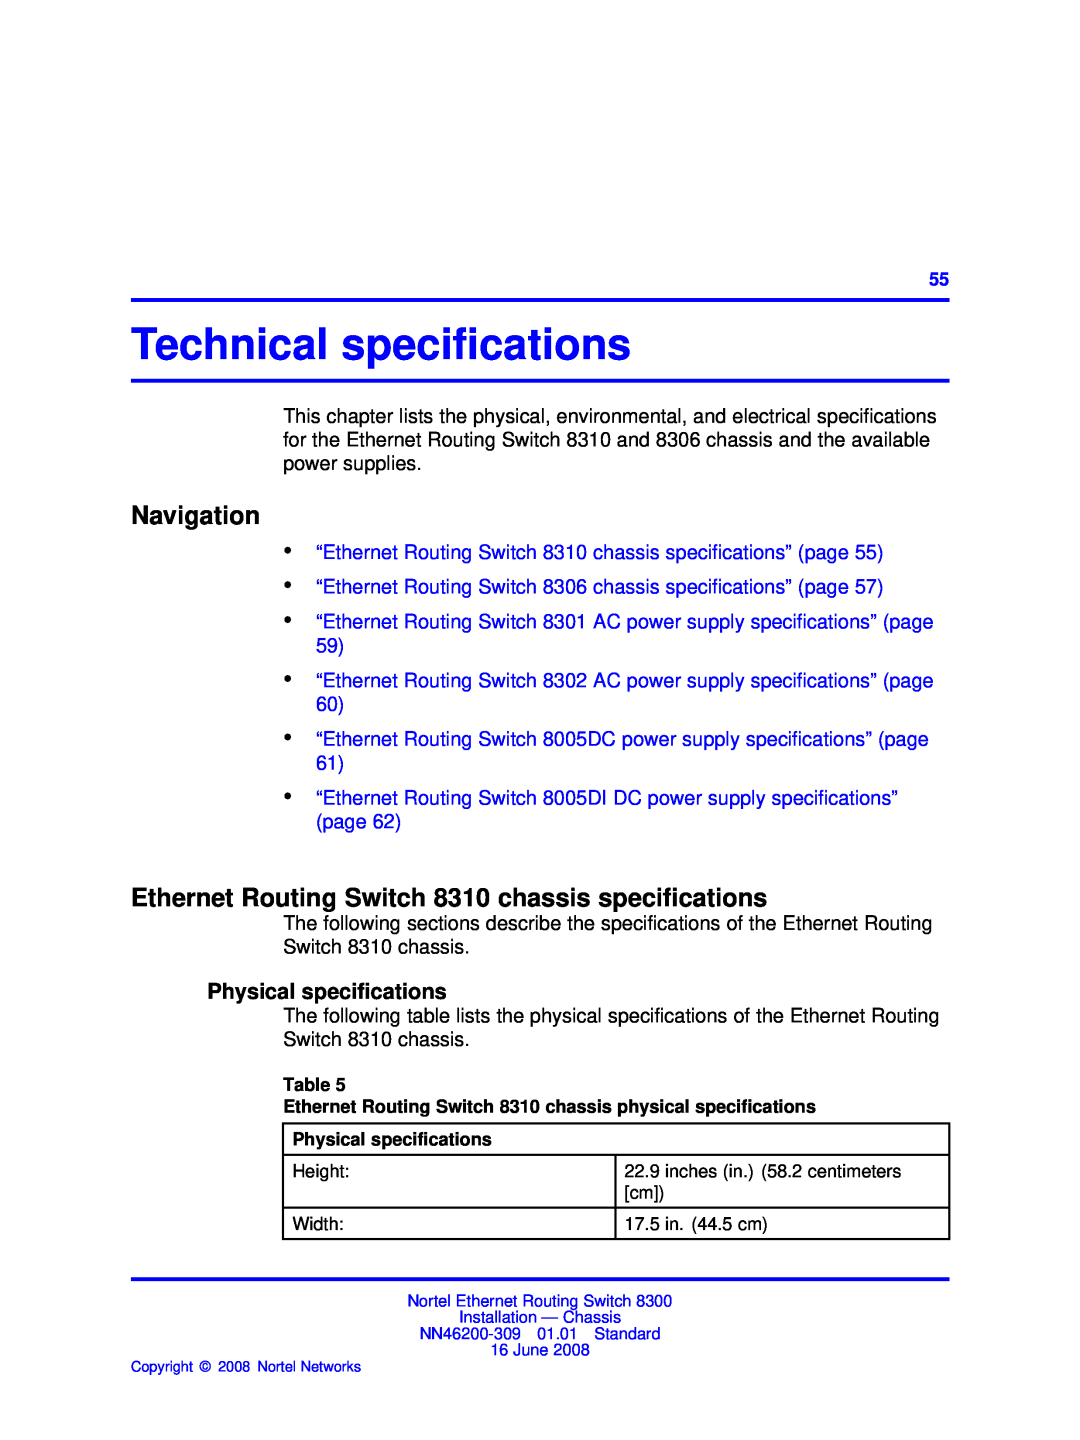 Nortel Networks 8306 Technical speciﬁcations, Ethernet Routing Switch 8310 chassis speciﬁcations, Physical specifications 